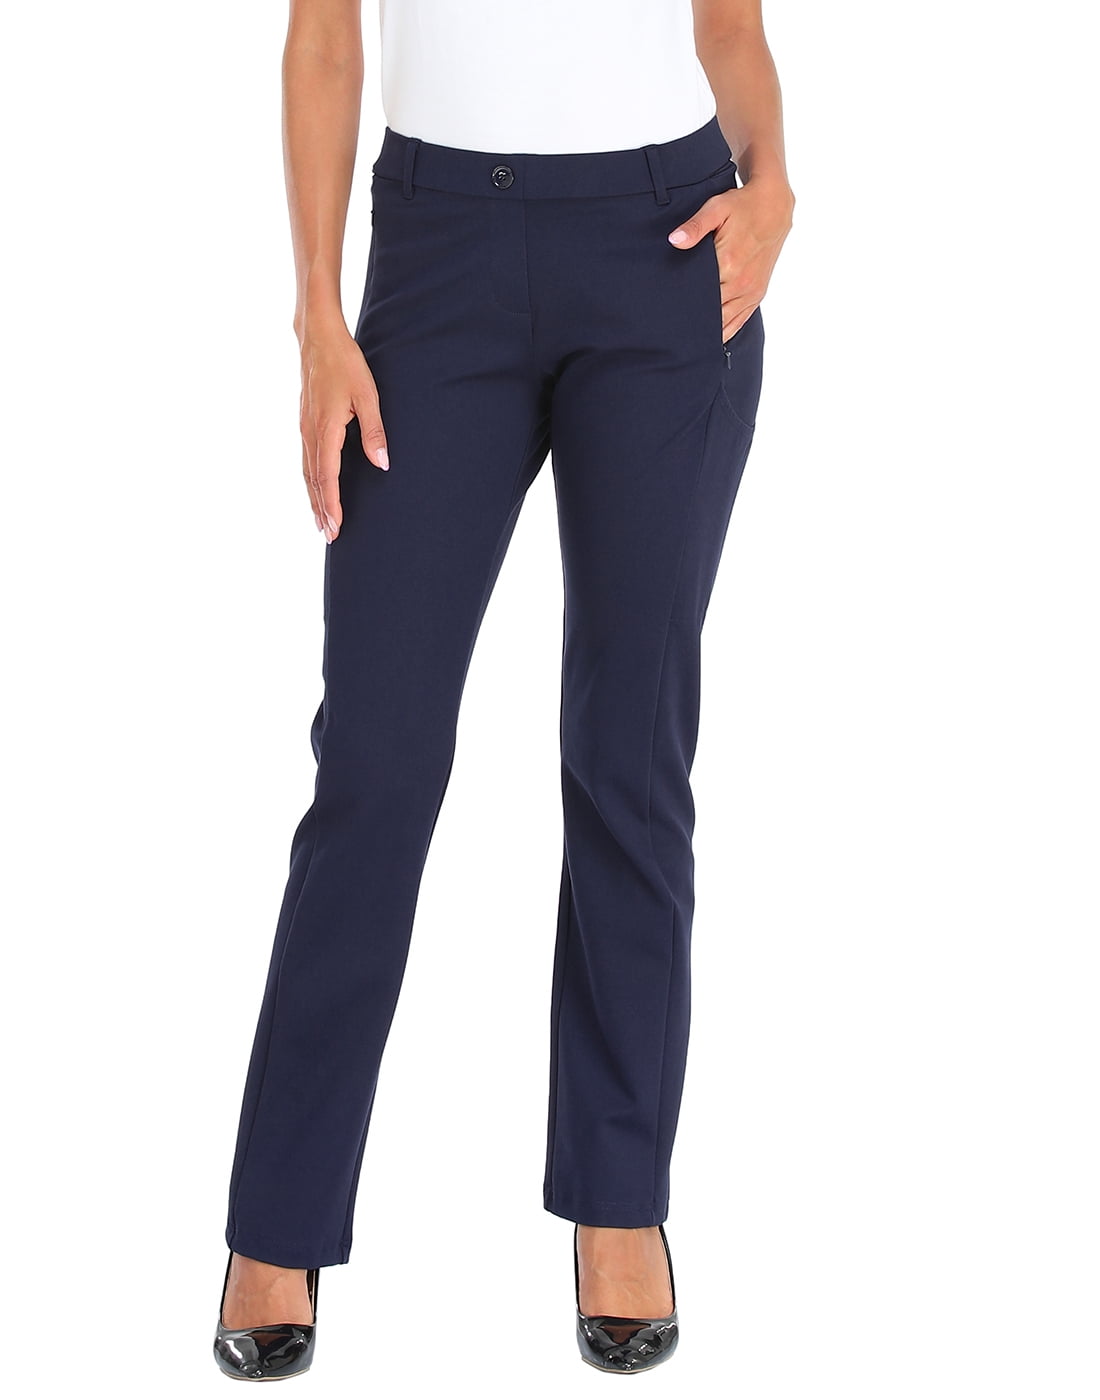 HDE Yoga Dress Pants for Women Straight Leg Pull On Pants with 8 Pockets  Navy Blue - XL Short 